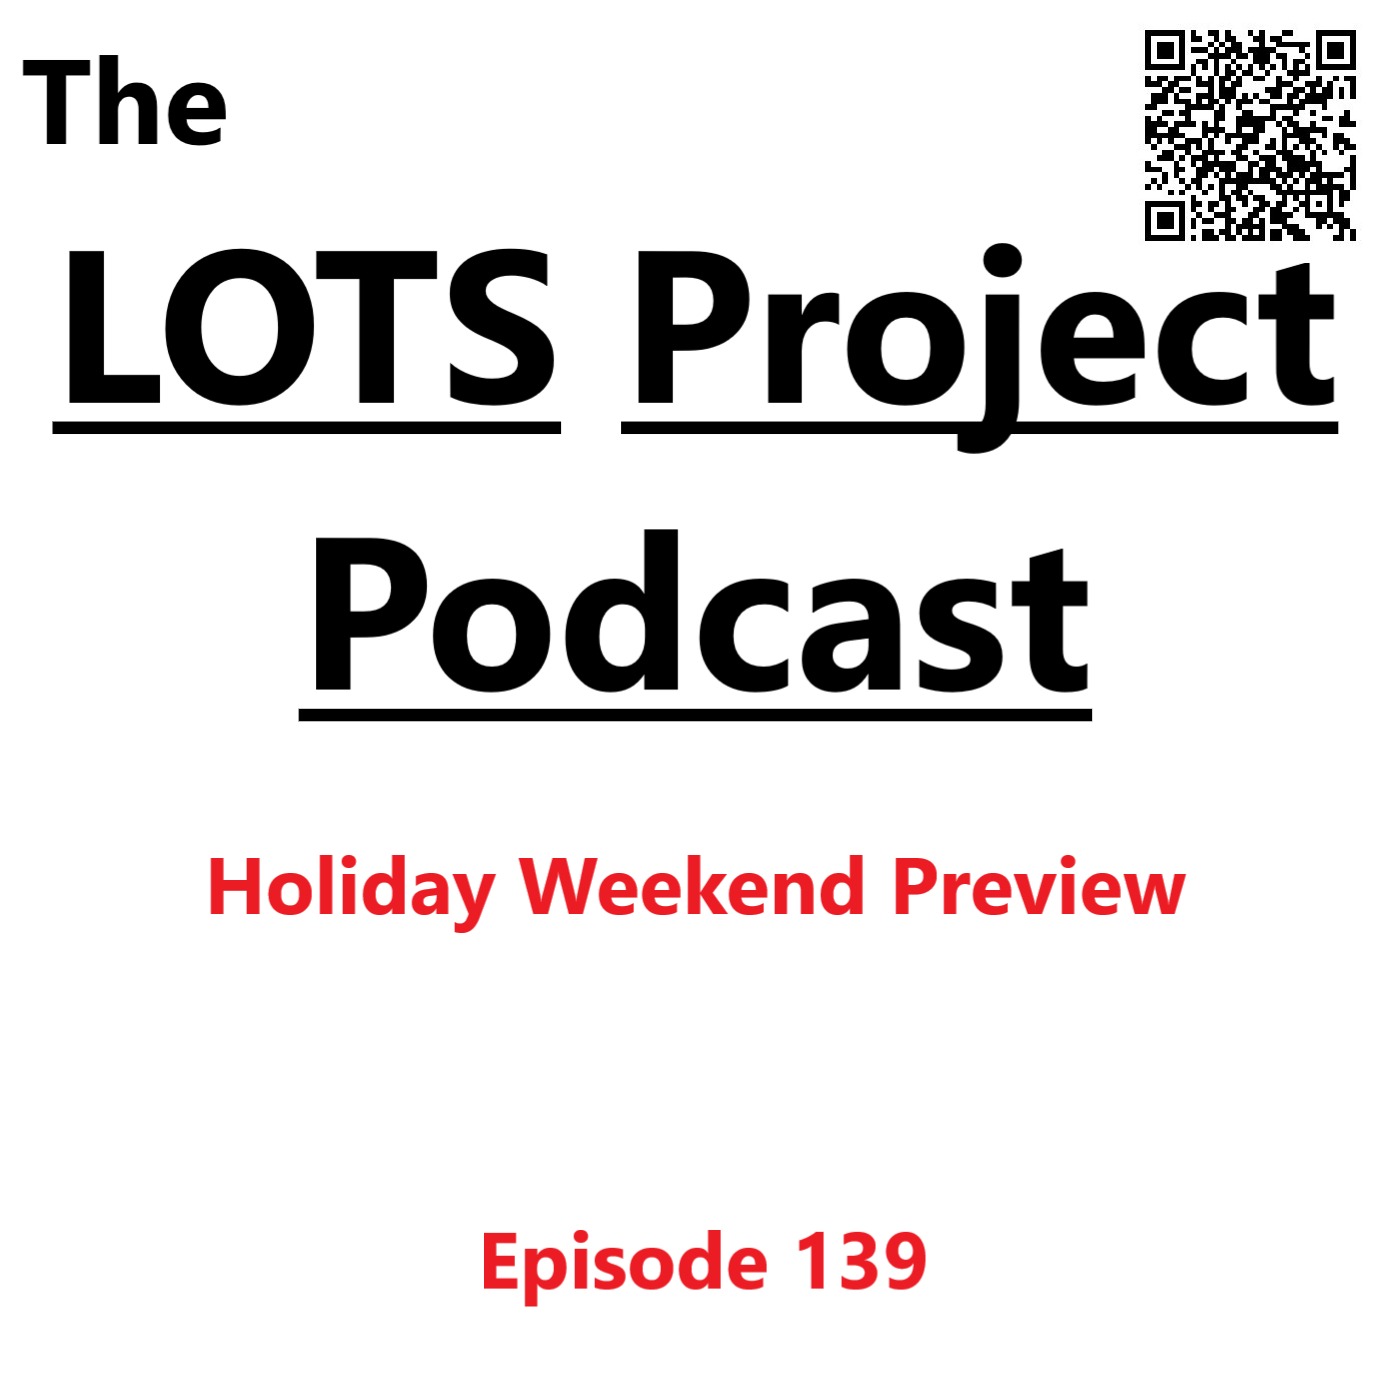 Holiday Weekend Preview